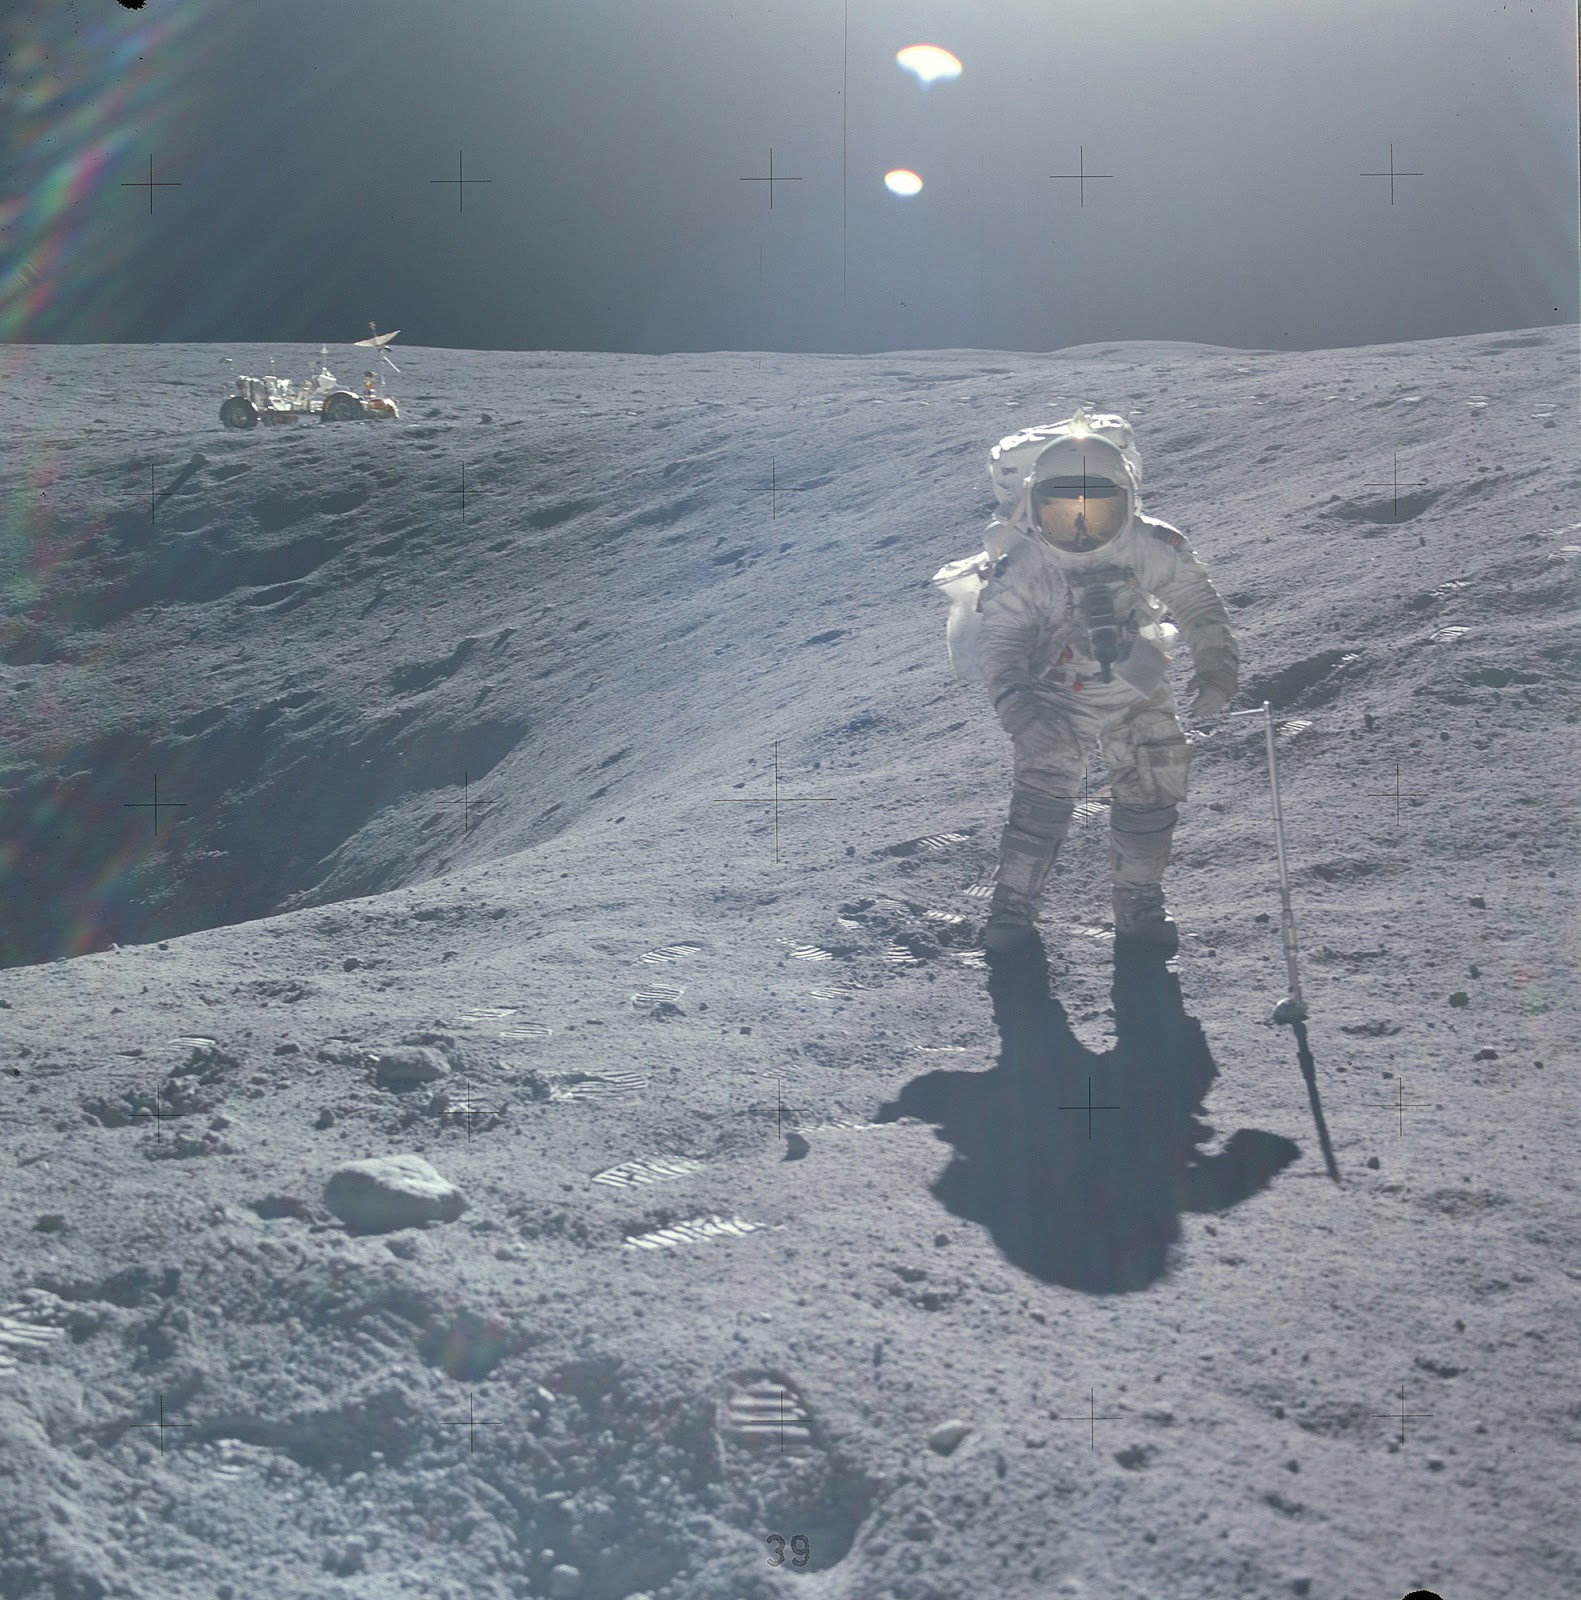 Charlie Duke photographed on the lunar surface with the moon rock scoop at his side. The scoop is attached to a pole segment to extend its length.